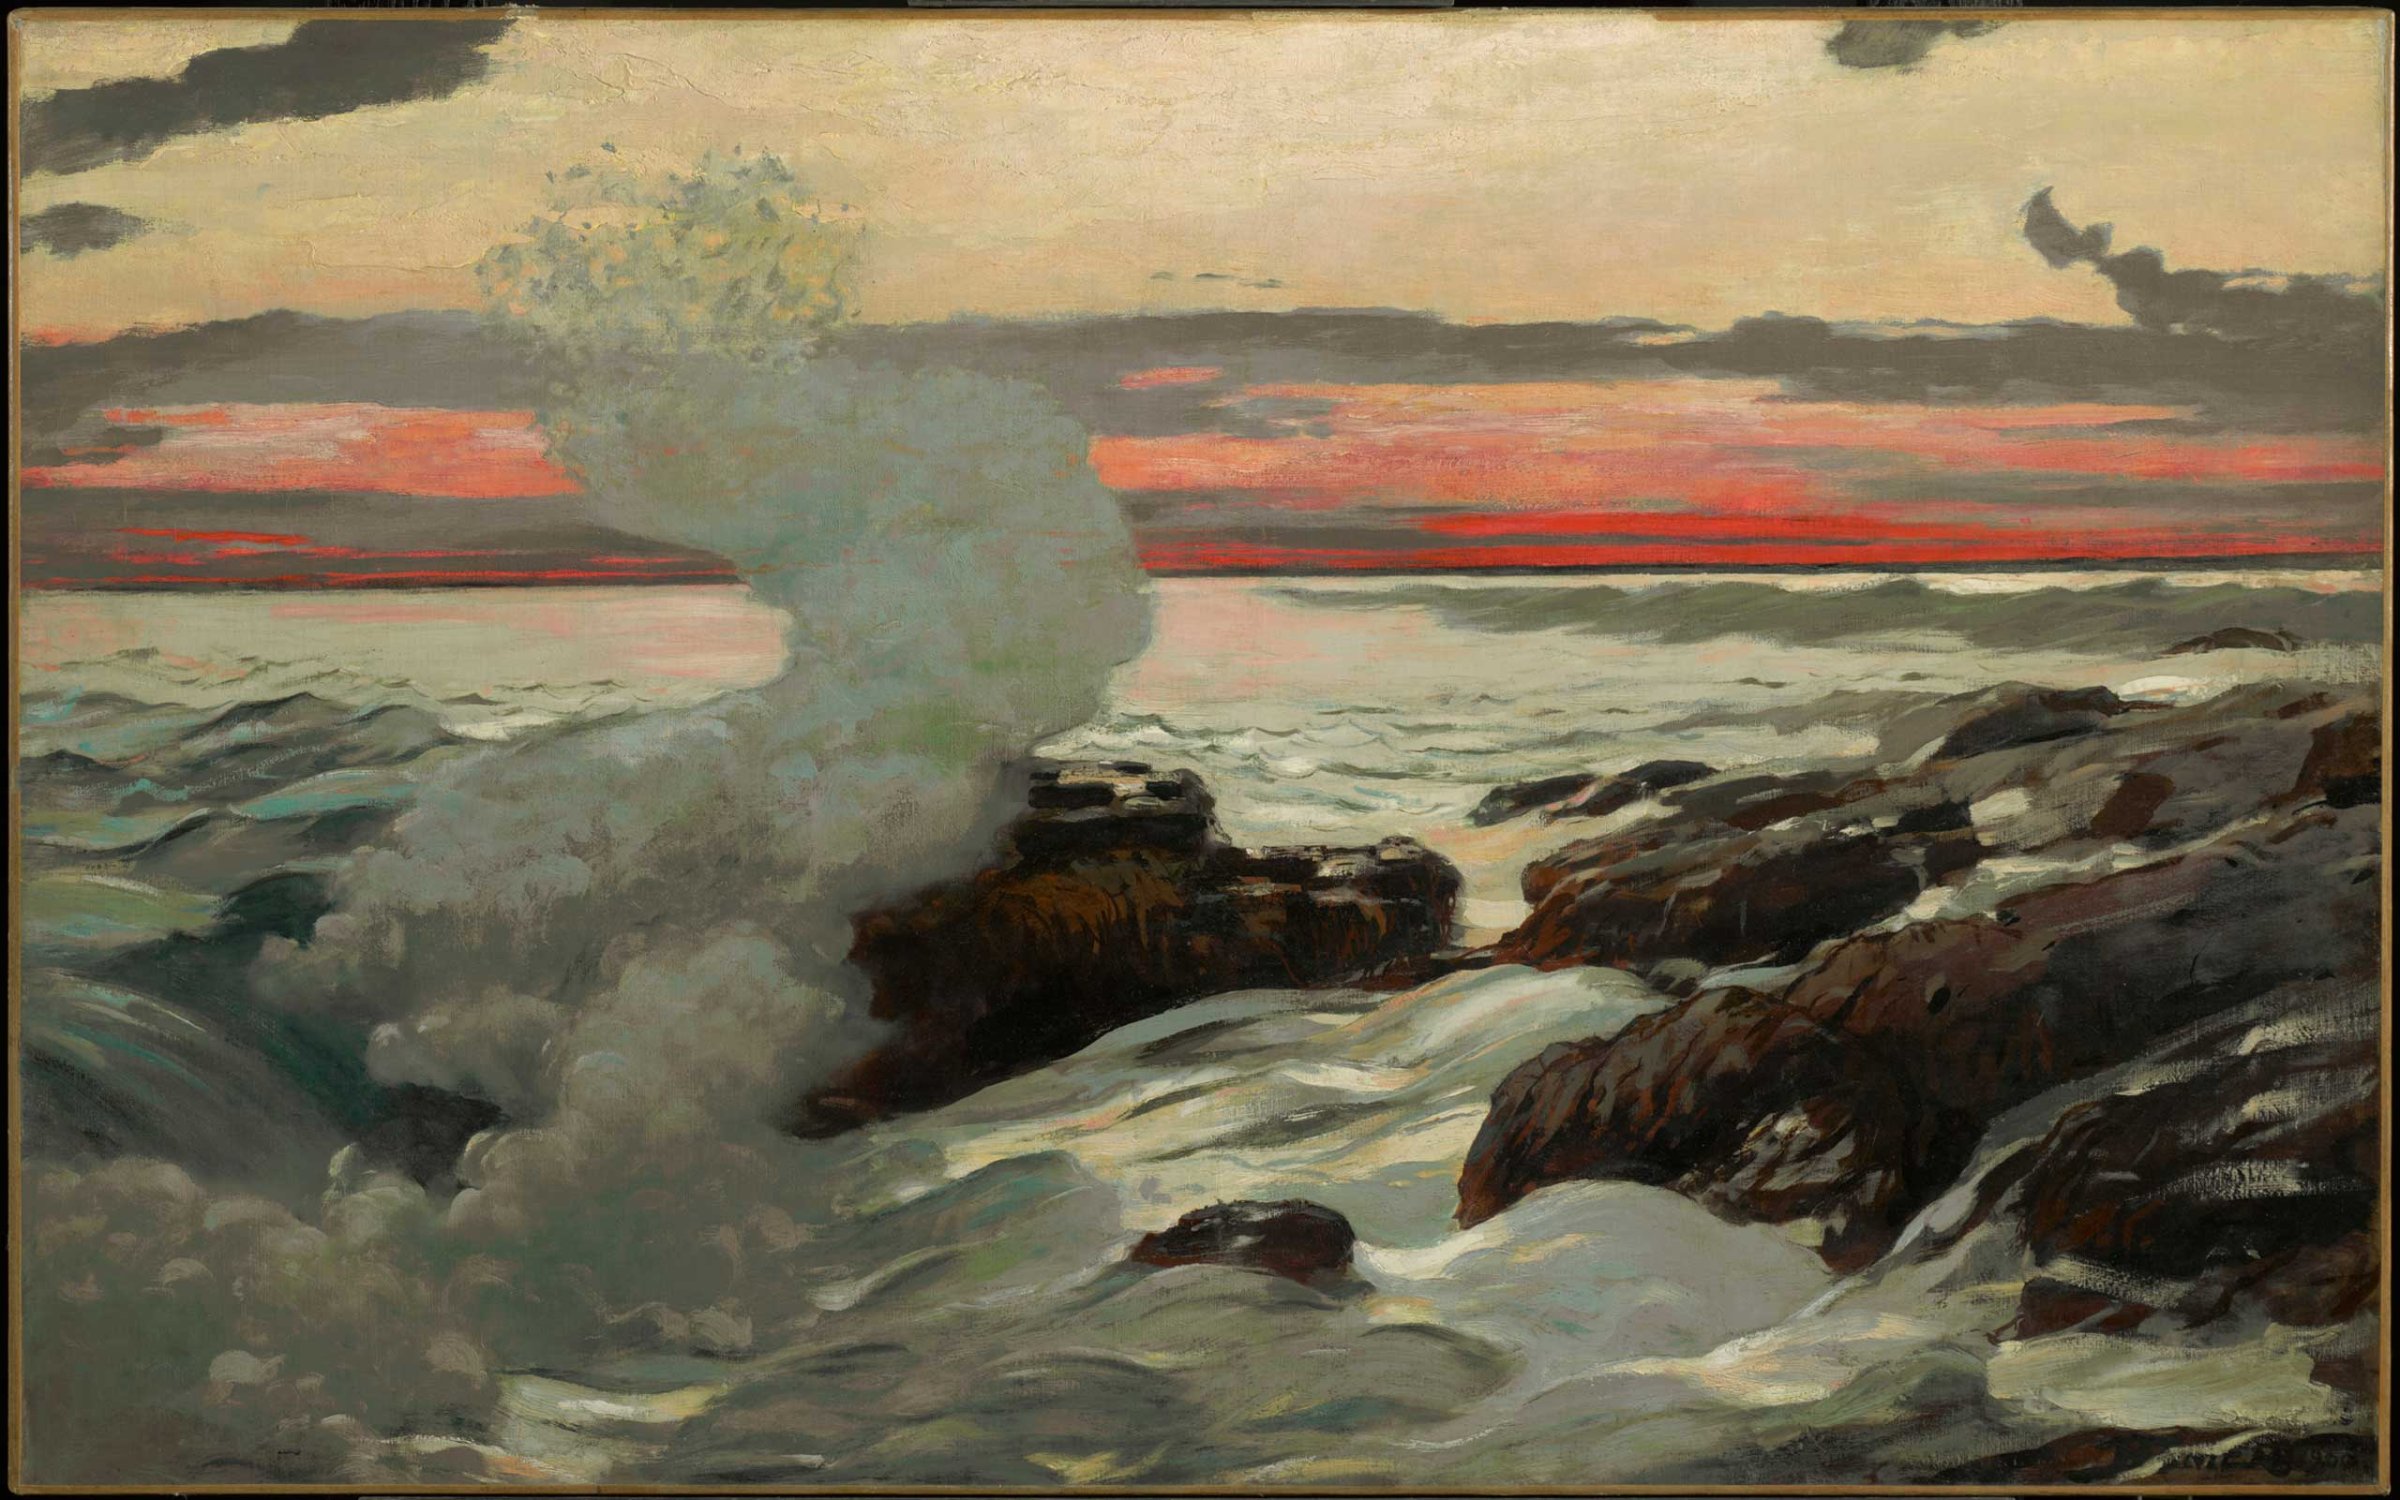 Winslow Homer (American, 1836–1910), West Point, Prout’s Neck, 1900. Oil on canvas, 30 1/16 x 48 1/8 in. Clark Art Institute, Williamstown, Massachusetts, 1955.7